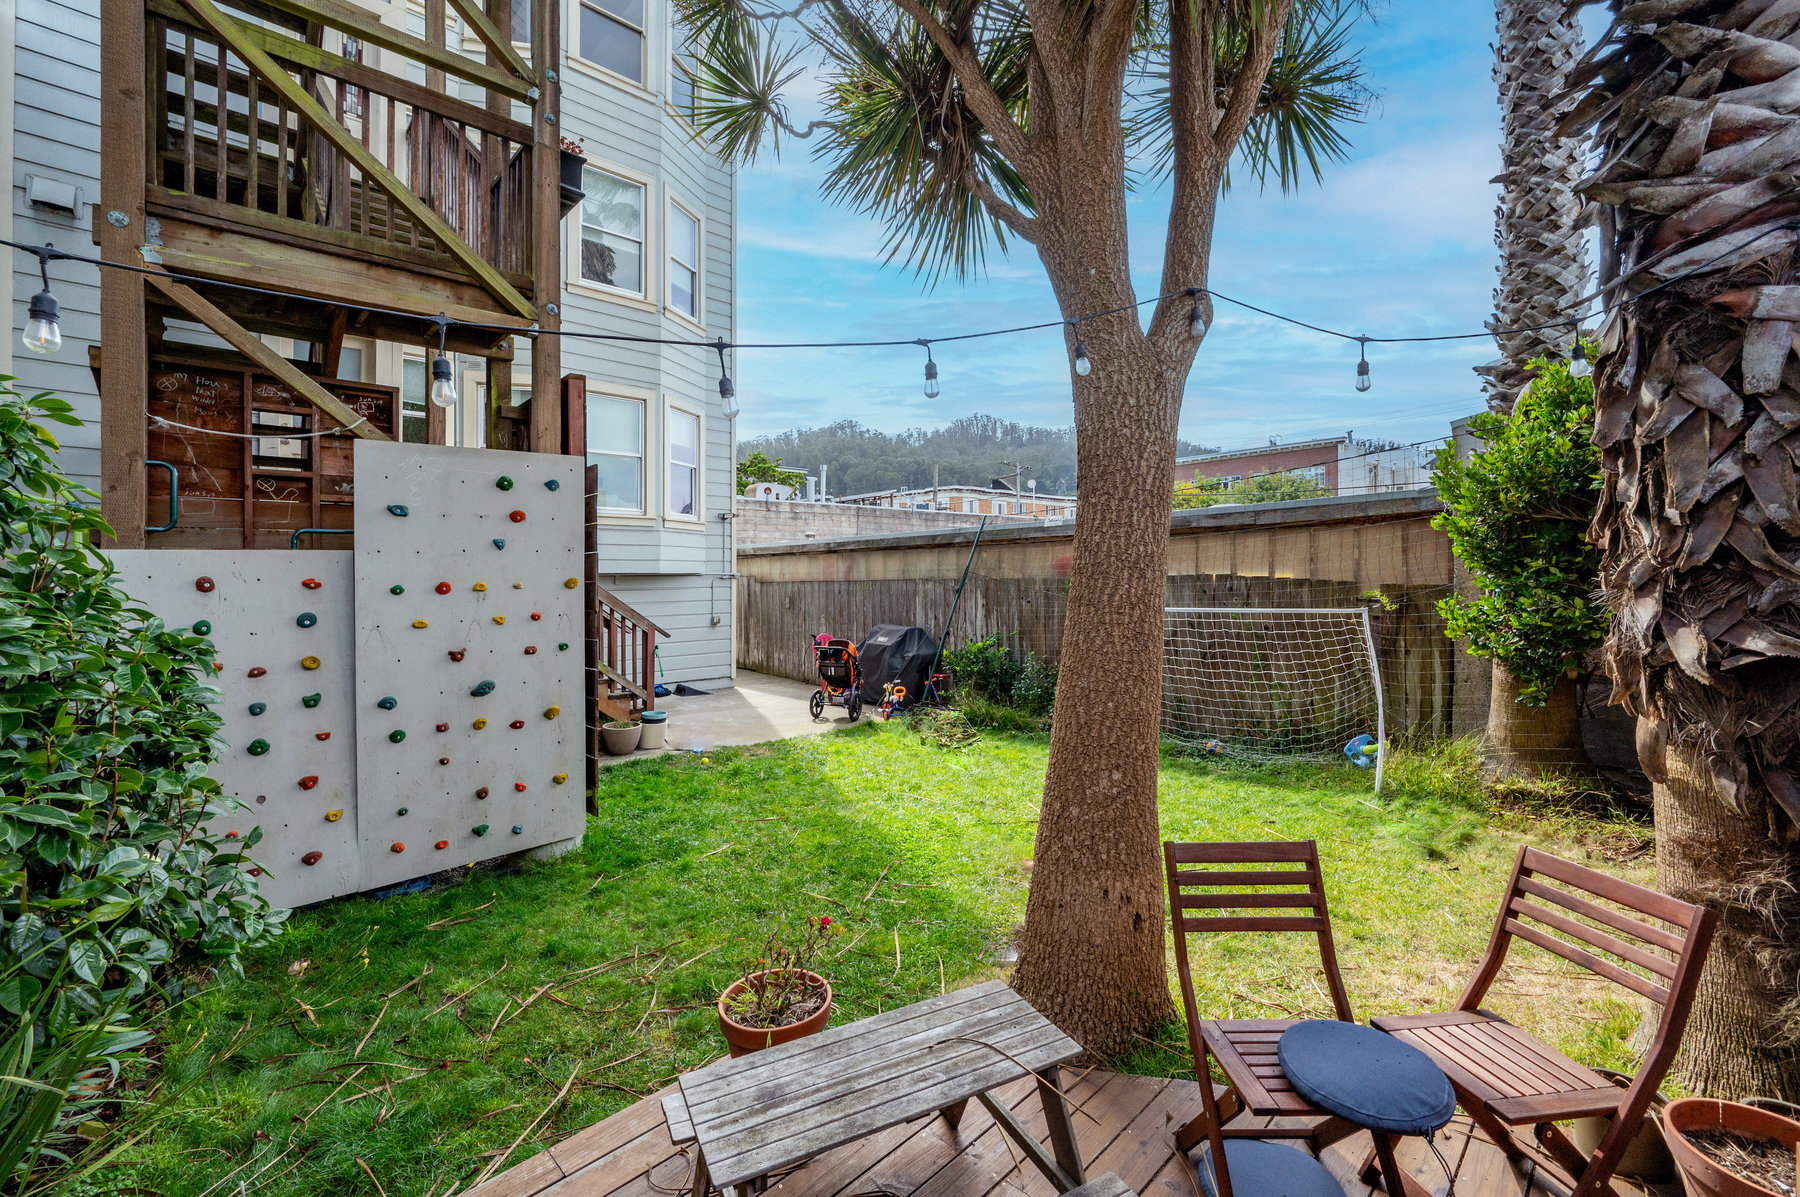 Property Photo: Photo of shared yard. There is grass and a sitting area on small deck.